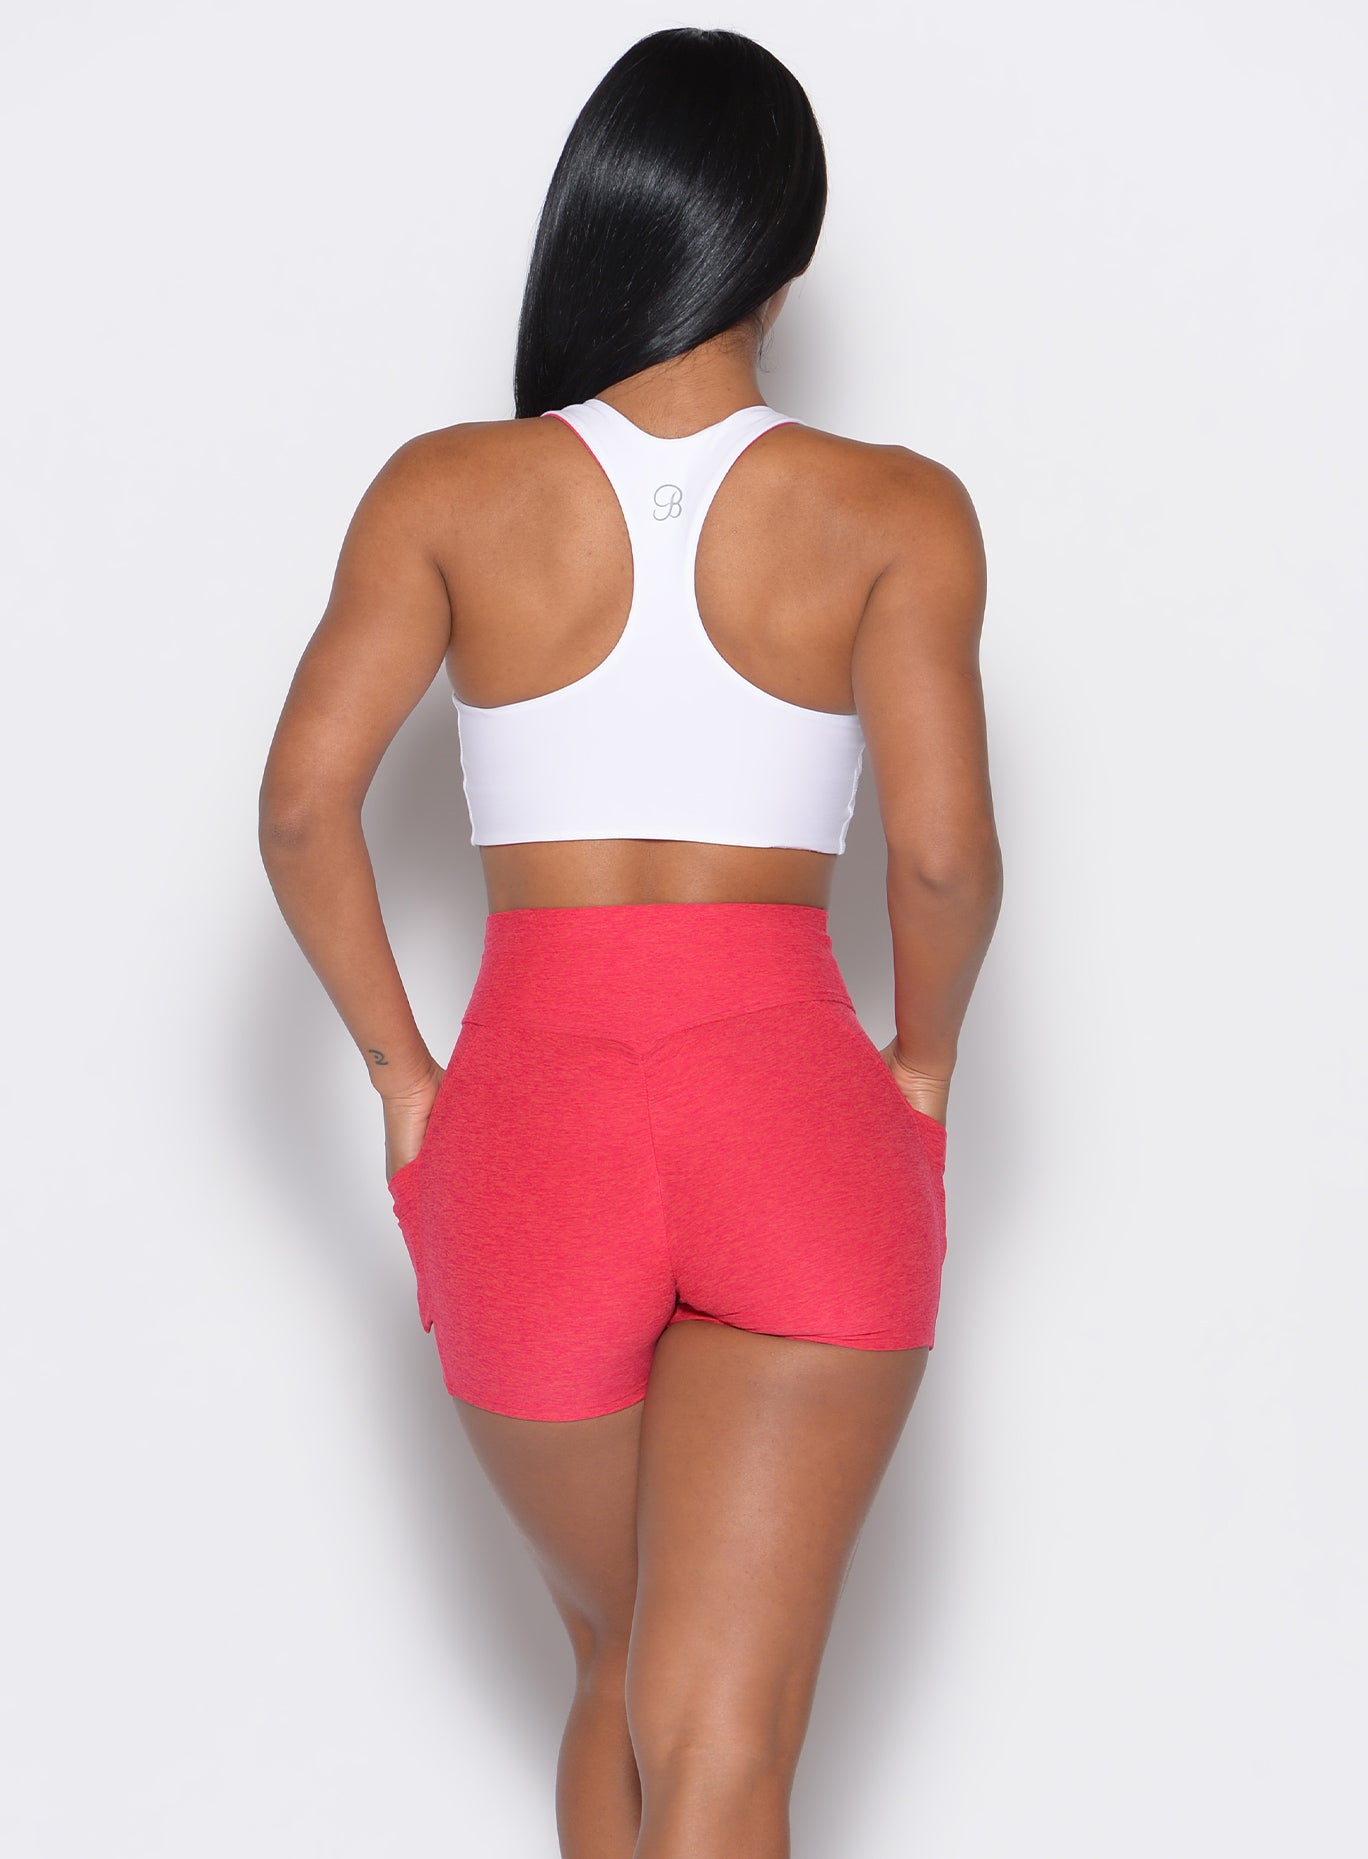 back profile view of a model wearing a reversible tank bra in white color along with a matching shorts